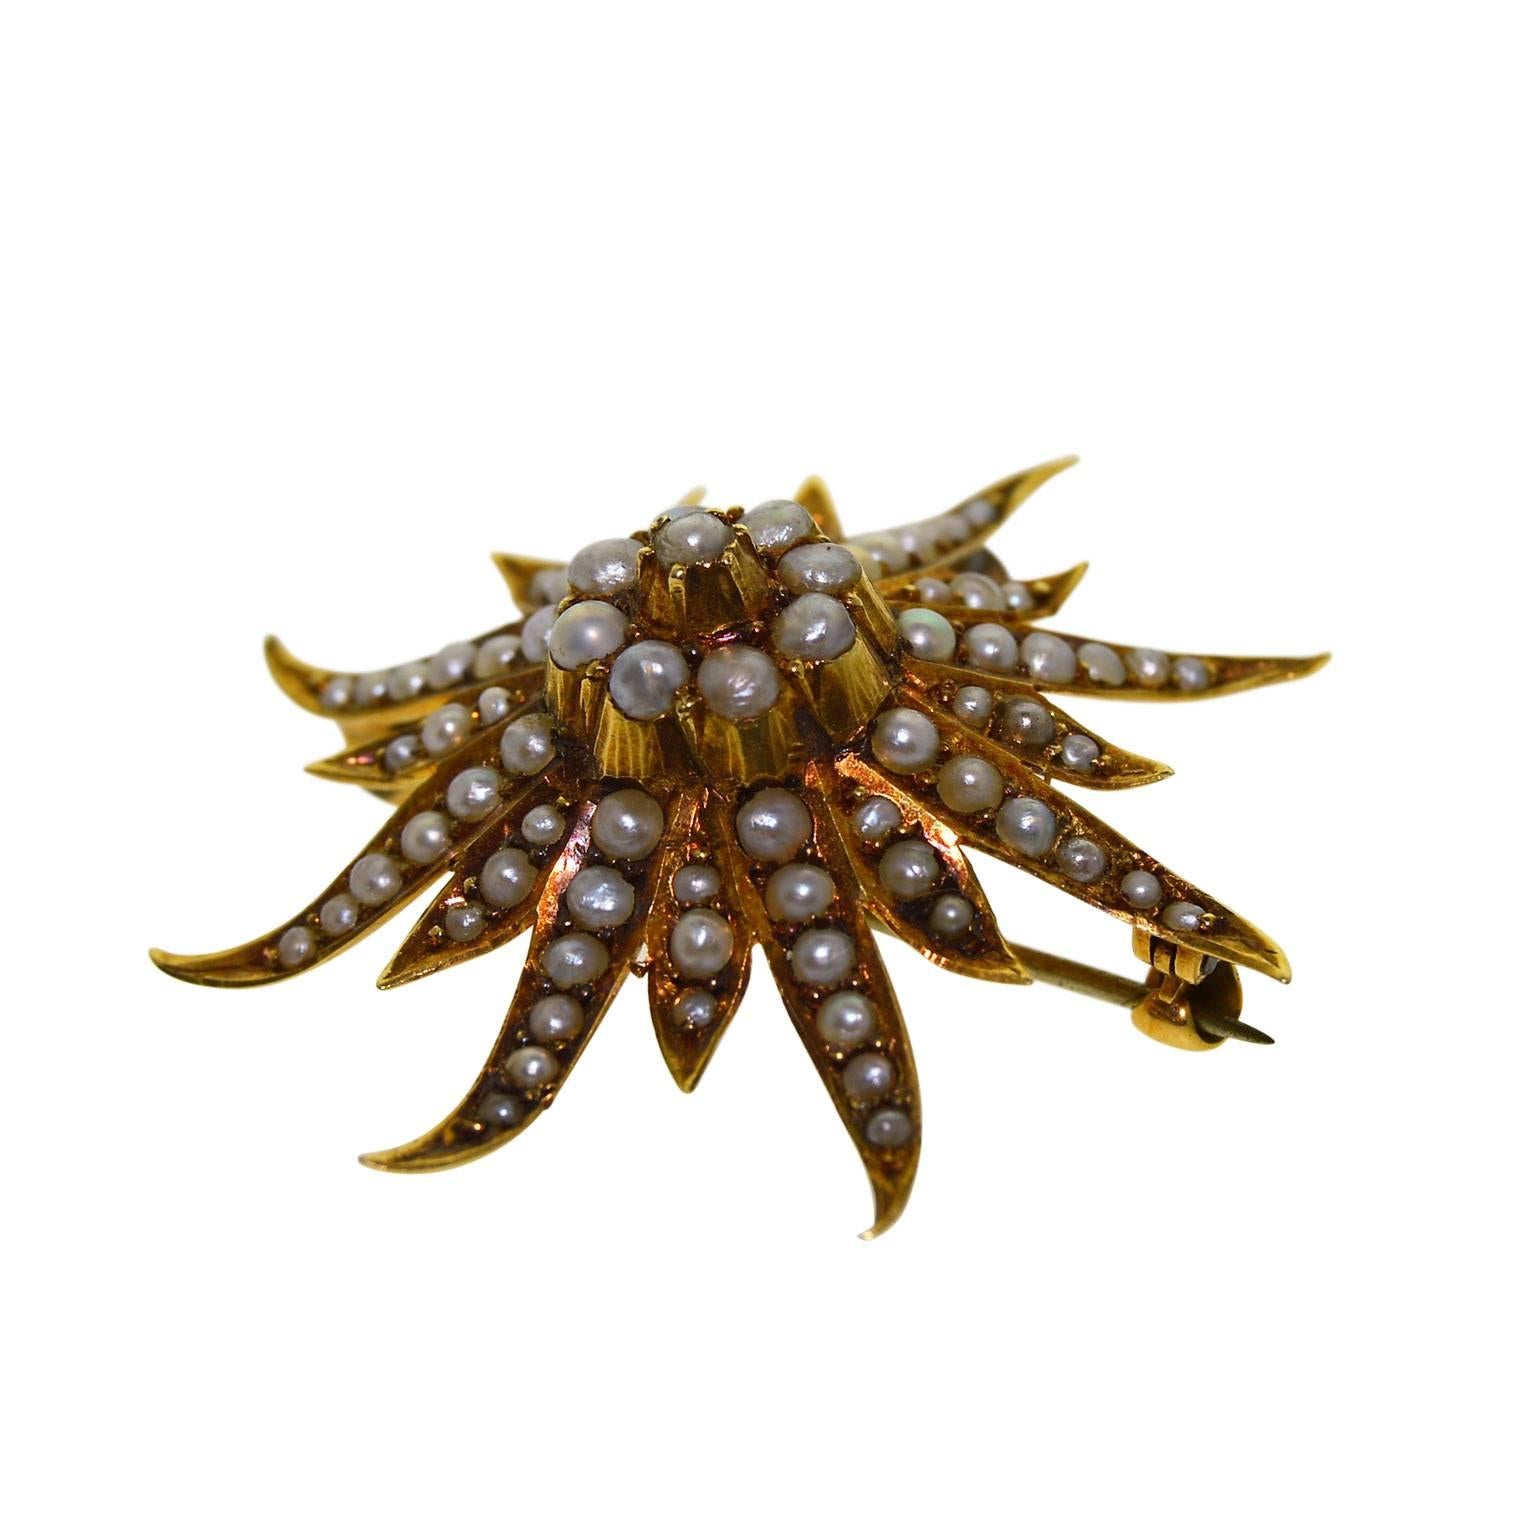 This is a unique and unusual hand constructed pin or a hanging pendant. It measures 35mm in diameter or about 1. 5 inches. You cannot help but recognize the resemblance to a variety of sea creatures, clearly it looks like a sea anemone more than